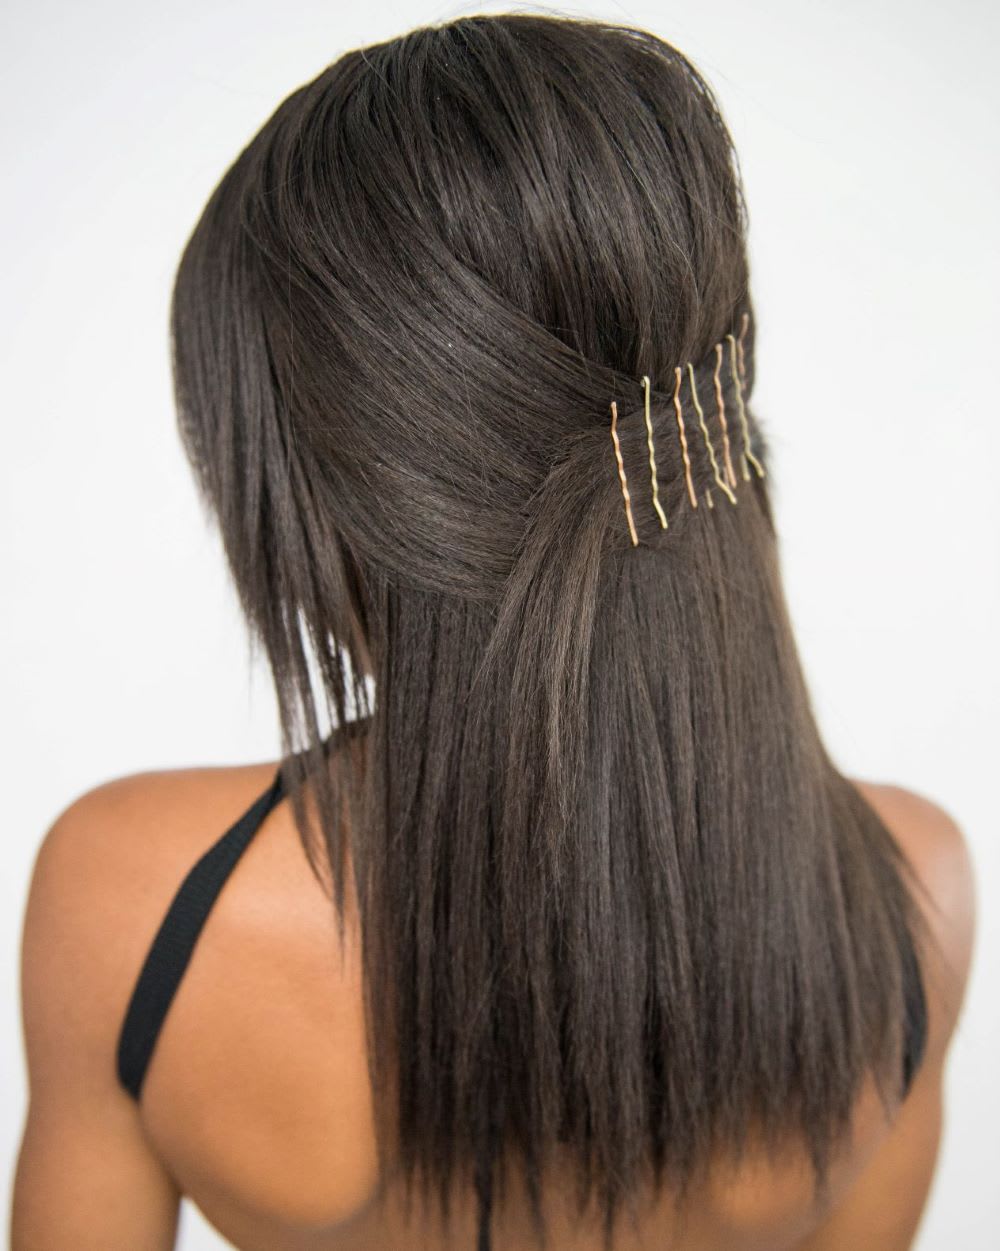 Ways a Bobby Pin Can Transform a Look | At Length by Prose Hair